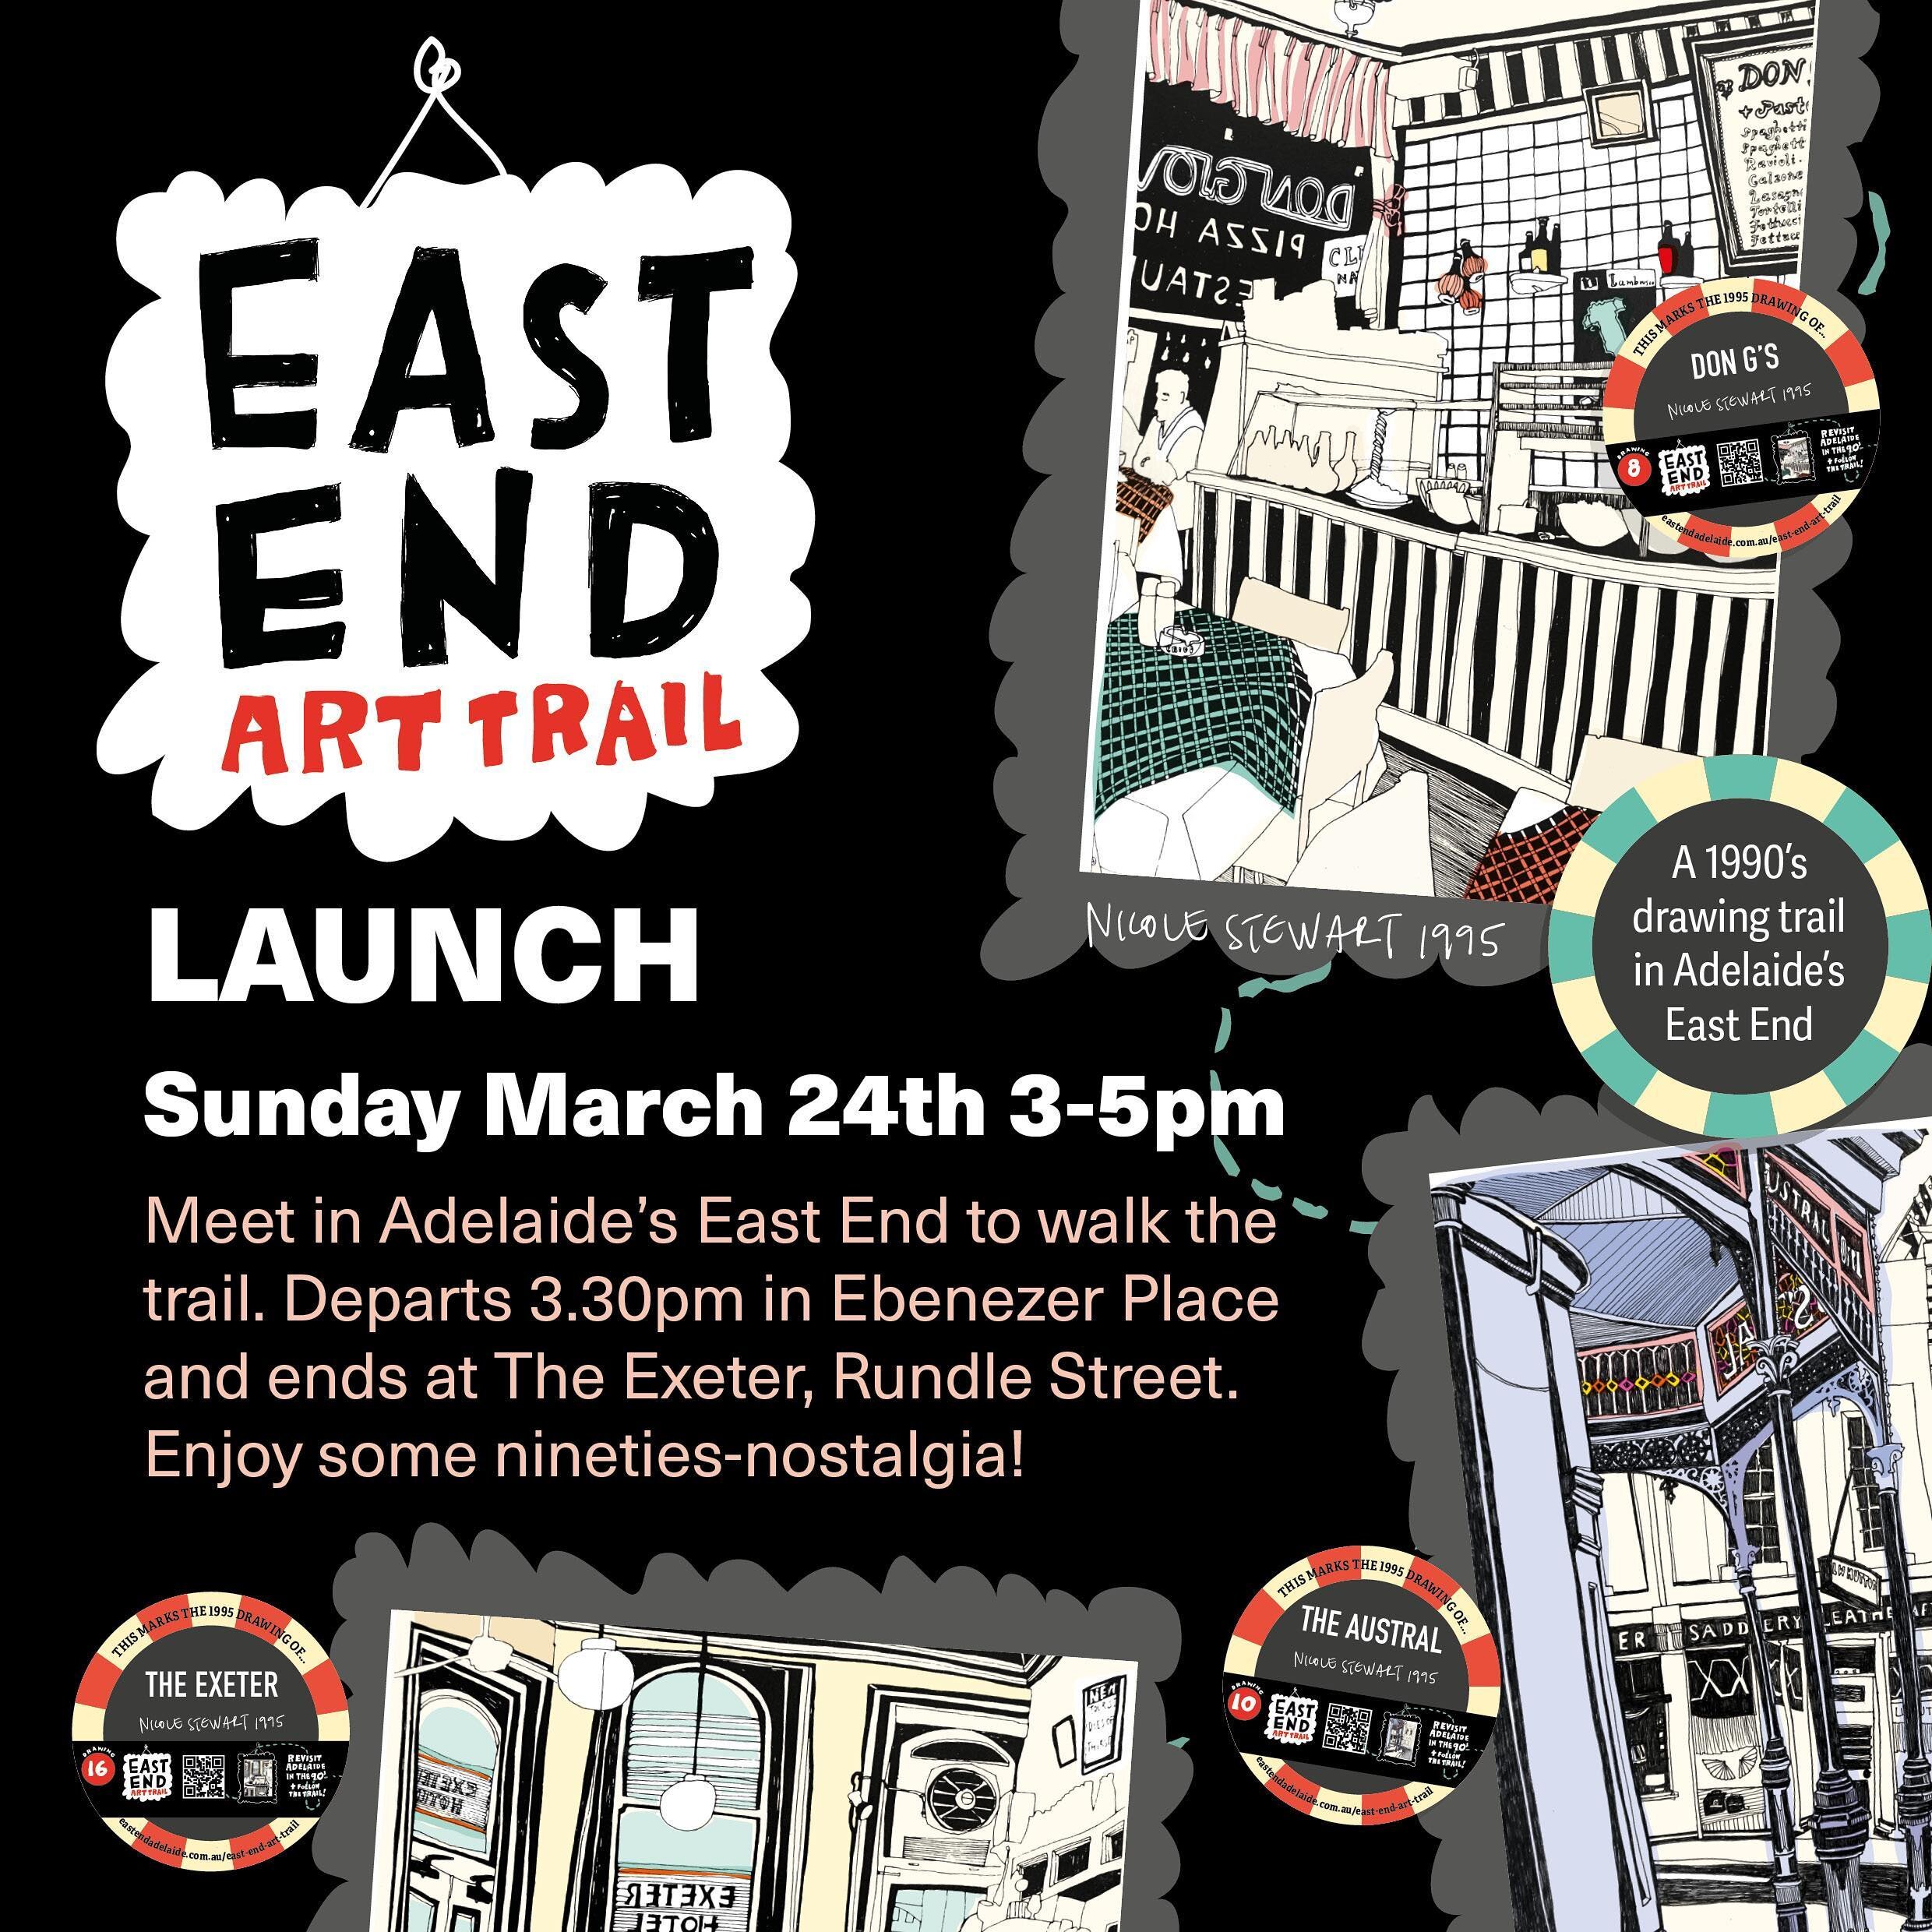 So you&rsquo;re all invited!! A Sunday afternoon stroll through Adelaide&rsquo;s East End, launching the East East Drawings Art Trail, March 24.
Starts in Ebenezer Place and ends at The Exeter. Come along and bring your 1995 memories!
@cityofadelaide